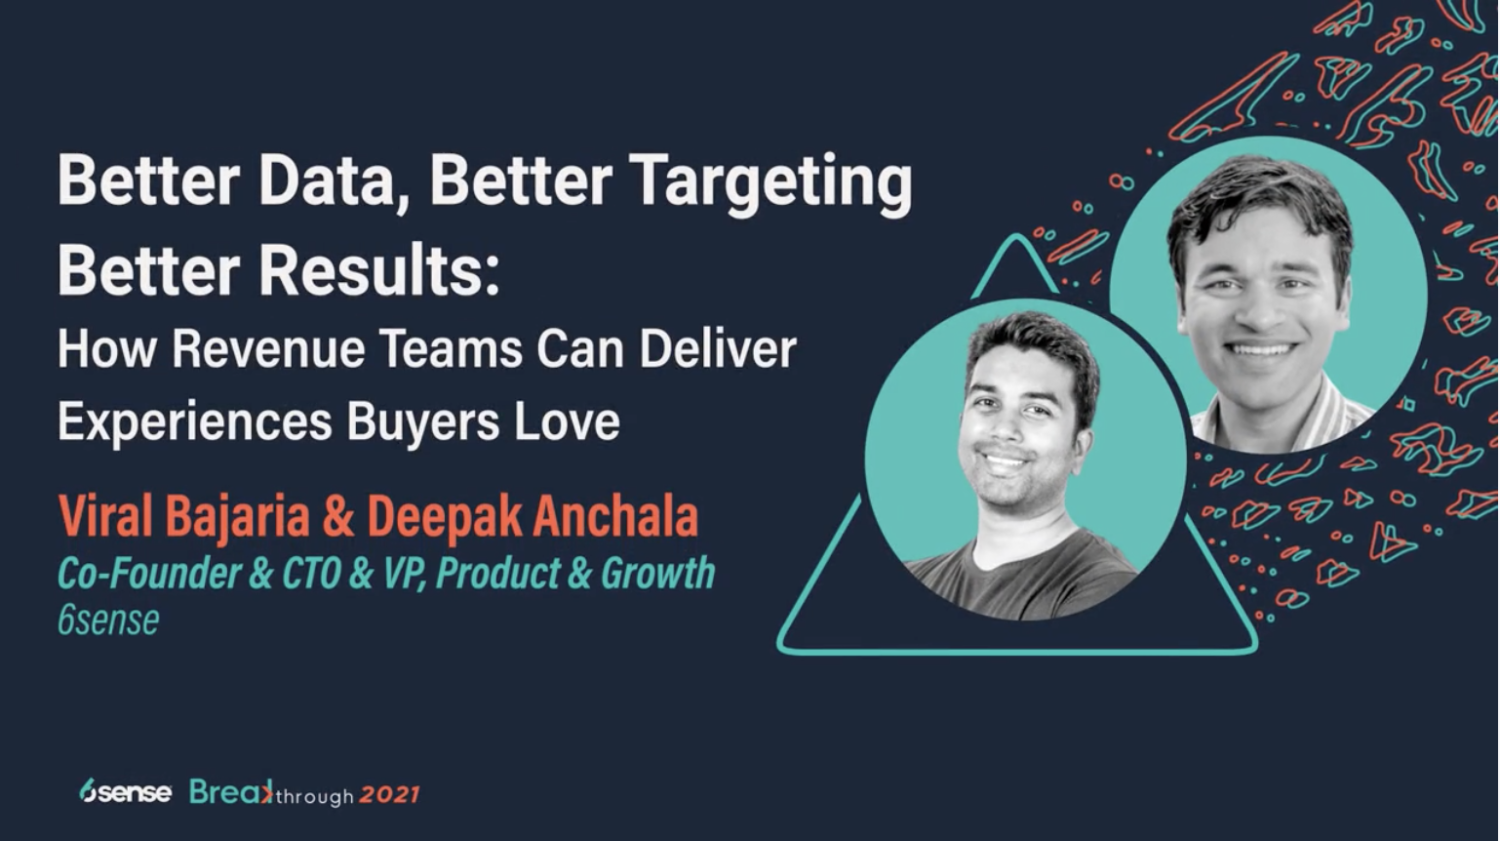 Better Data, Better Targeting, Better Results: How Revenue Teams Can Deliver Experiences Buyers Love